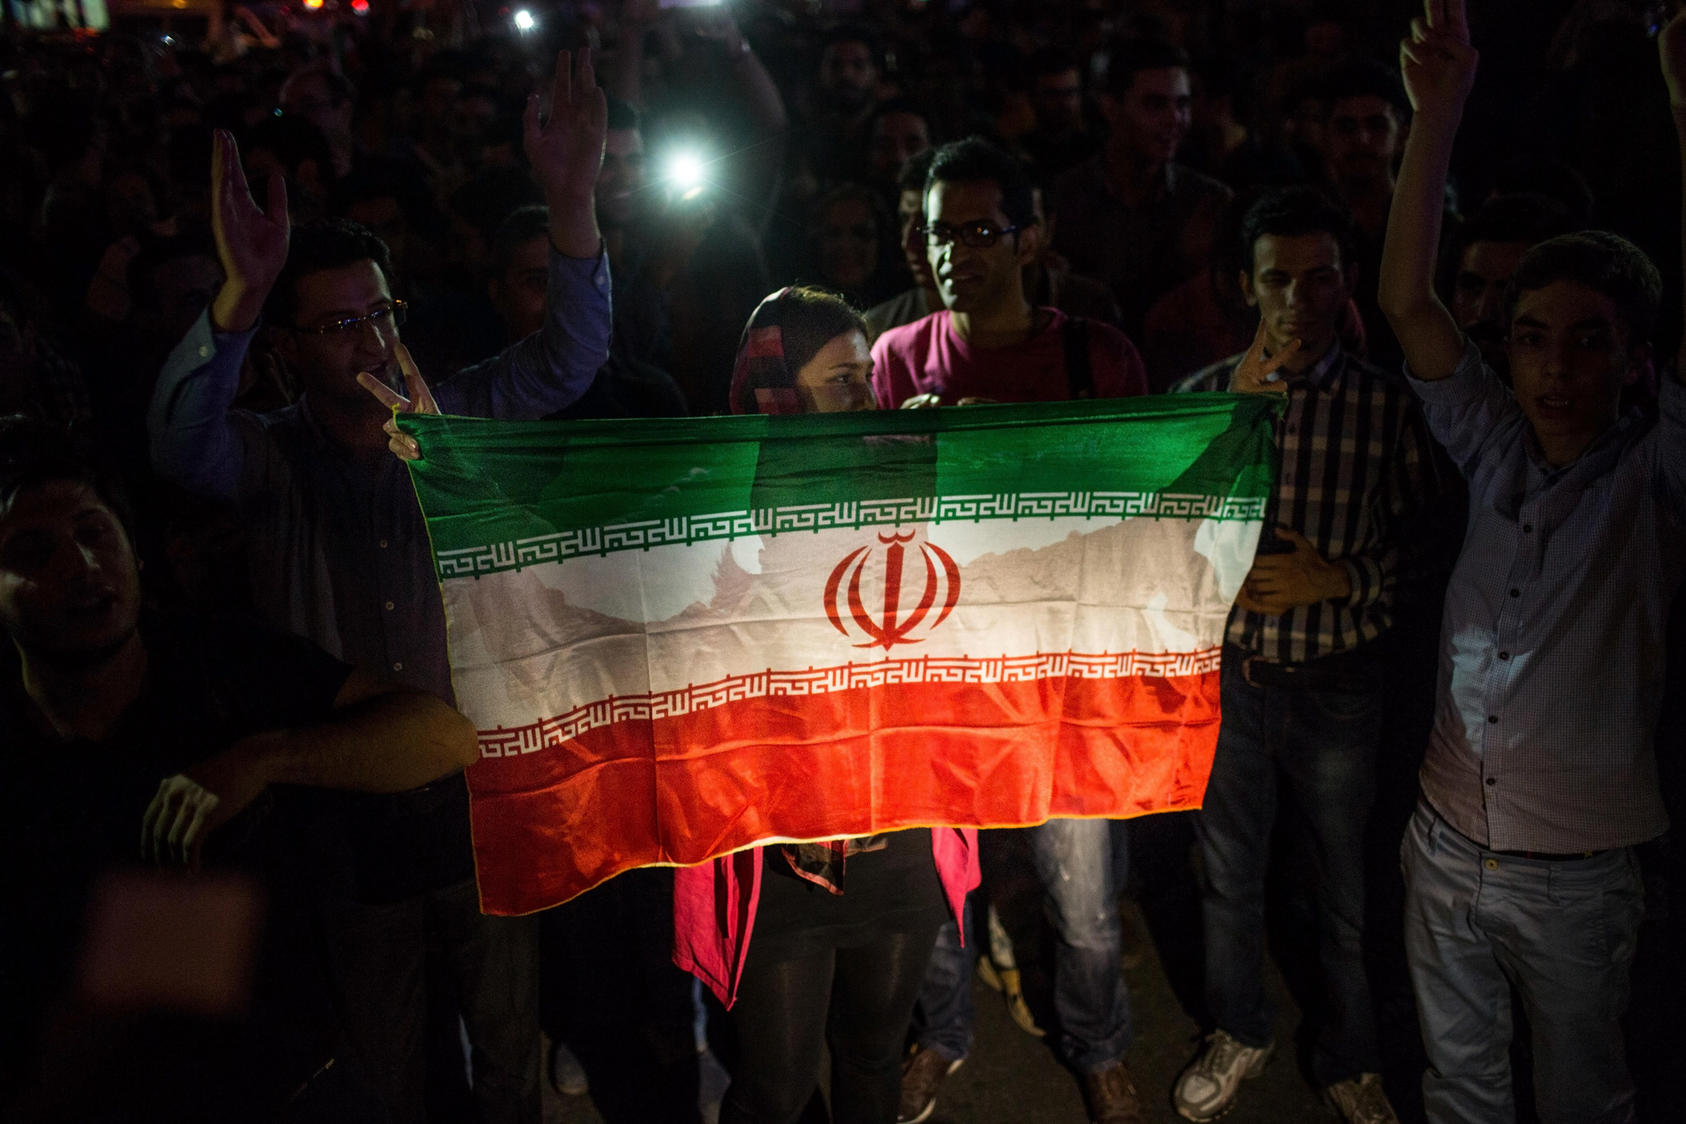 Iranians holding their flag celebrate the announcement that Iran had reached a nuclear deal with world powers in Tehran, Iran, July 14, 2015. Iran and a group of six nations led by the U.S. said they had reached a historic accord on Tuesday to significantly limit Tehran’s nuclear ability for more than a decade in return for lifting international oil and financial sanctions.